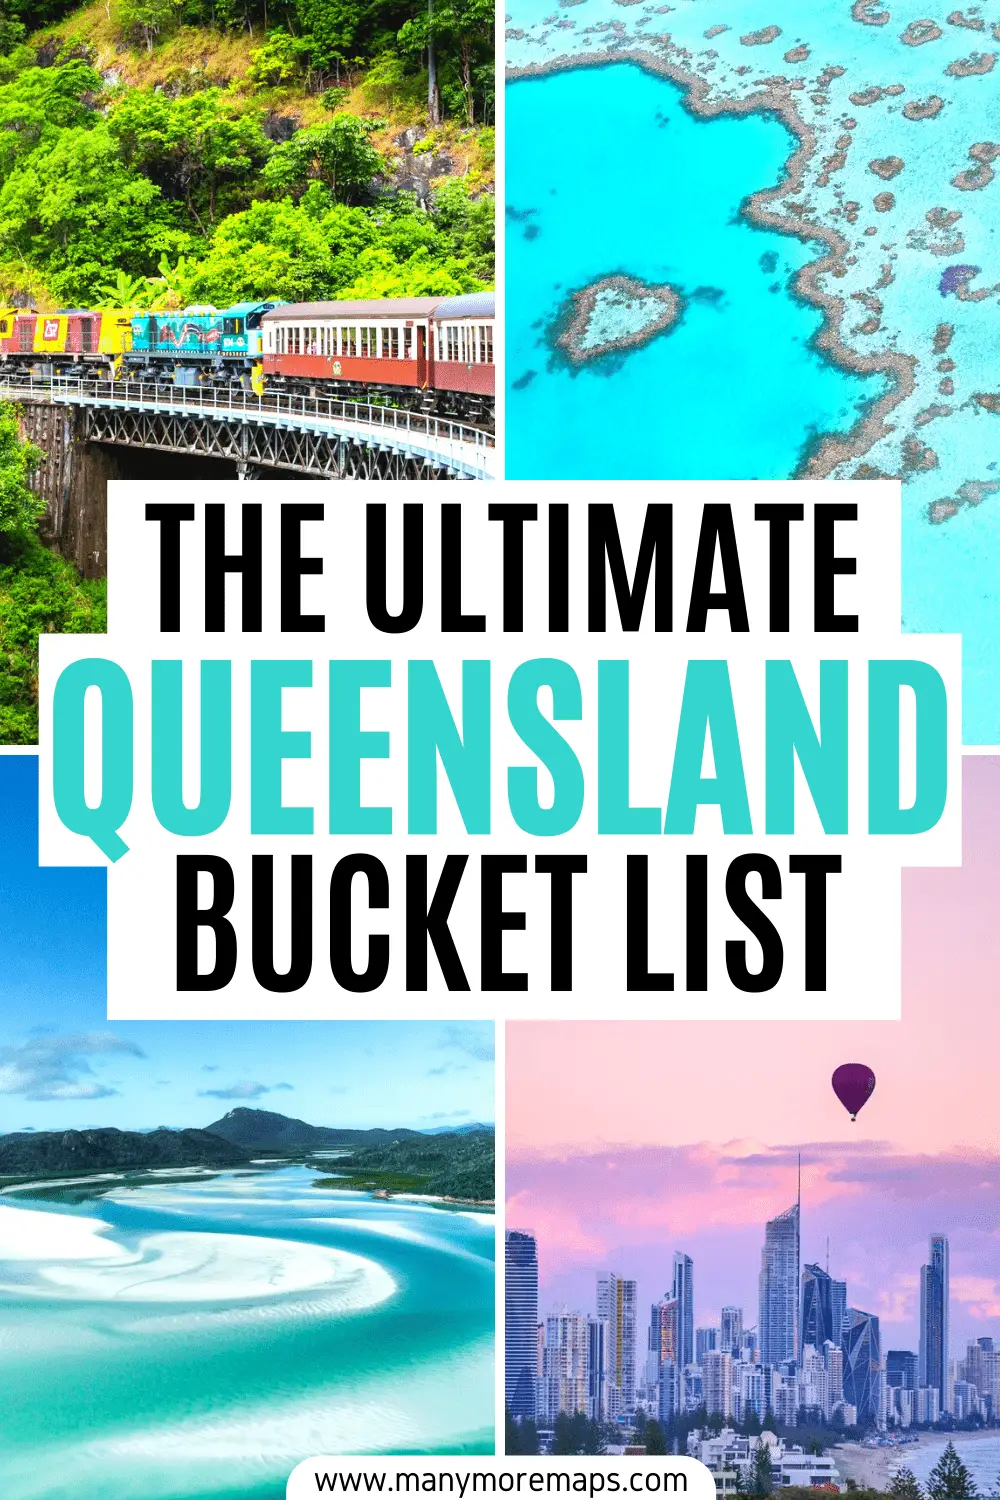 Planning a trip to Queensland, Australia? Here are the very best things to do, things to see and places to visit in Queensland Australia to add to your travel bucket list!